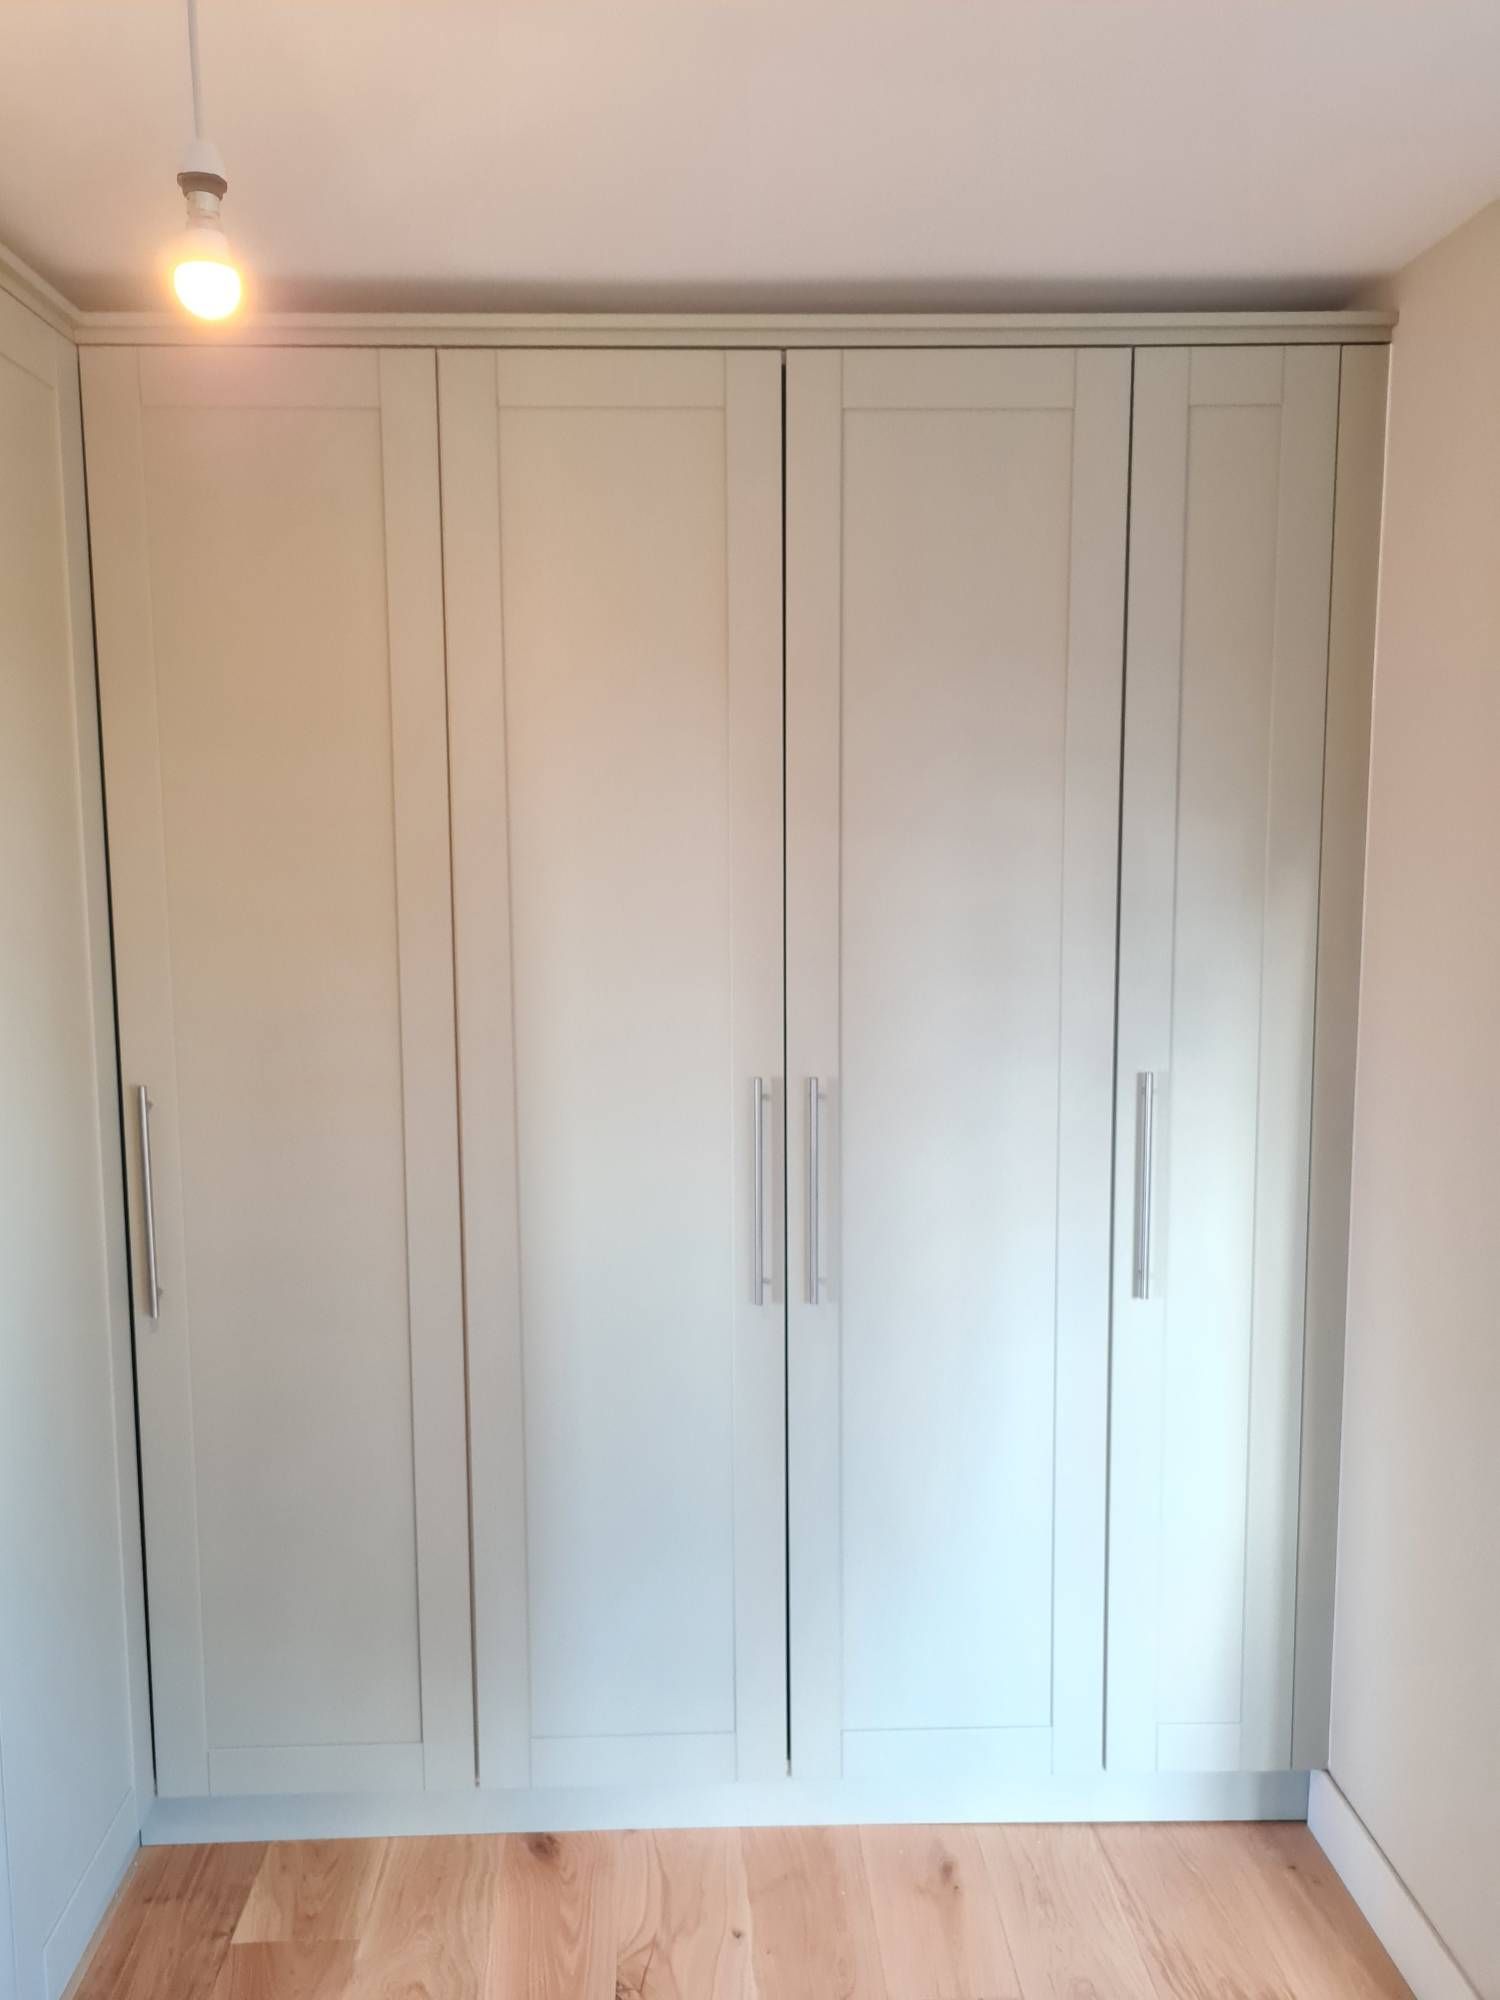 Carpentry & Kitchens In Maidstone Kent /wardrobes/decking Within Farrow And Ball Painted Wardrobes (Photo 15 of 15)